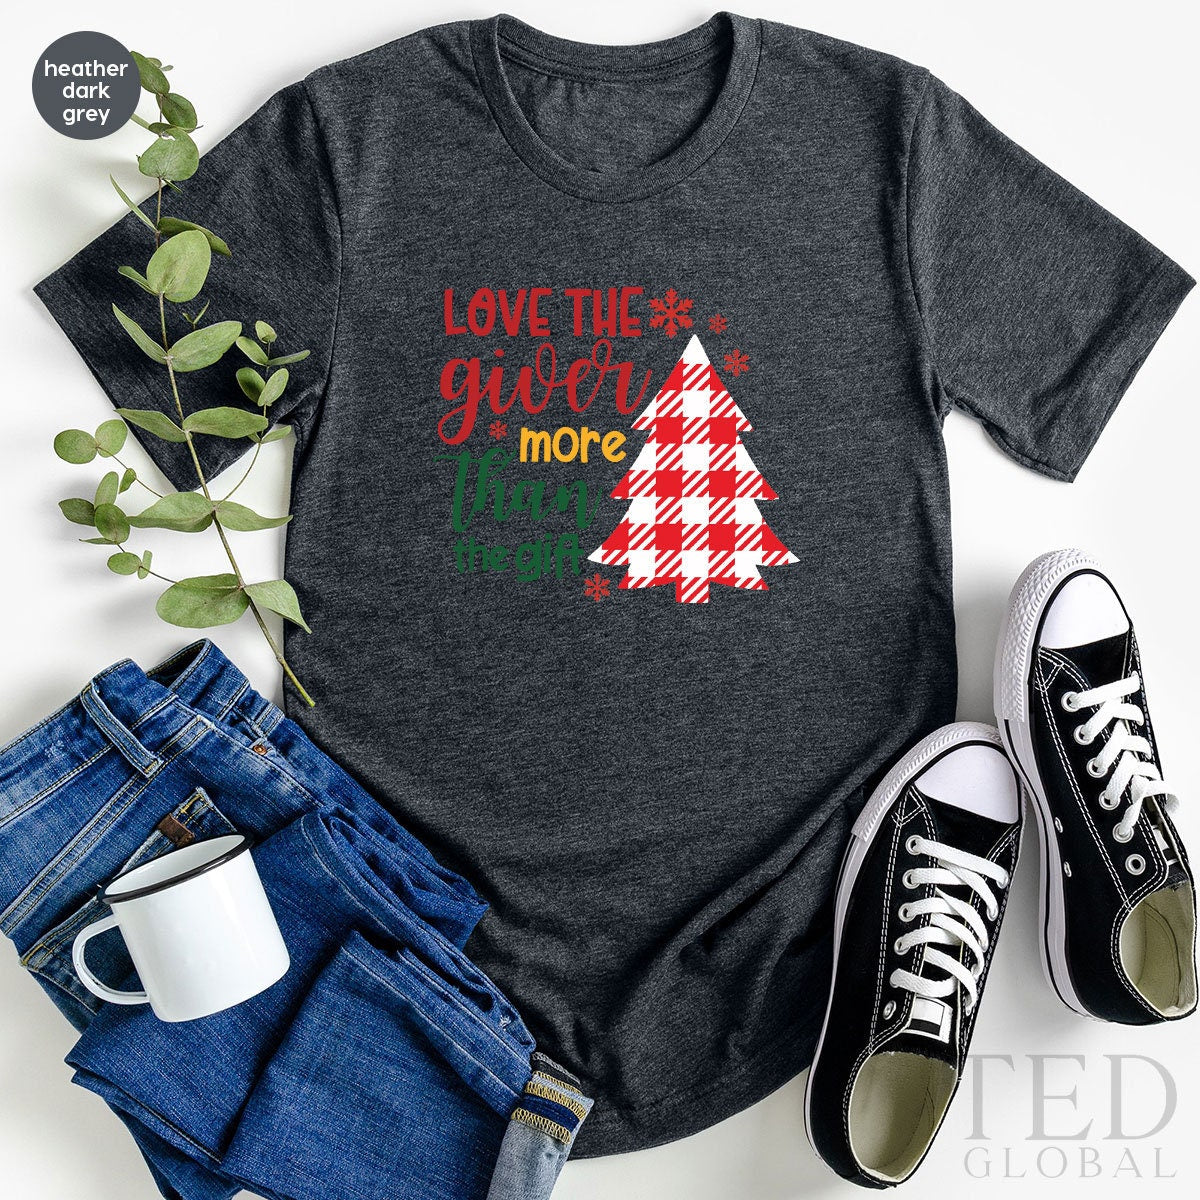 Funny Shirts, Official T-Shirt, Ba Cute – Cookie Baking Christmas Taster